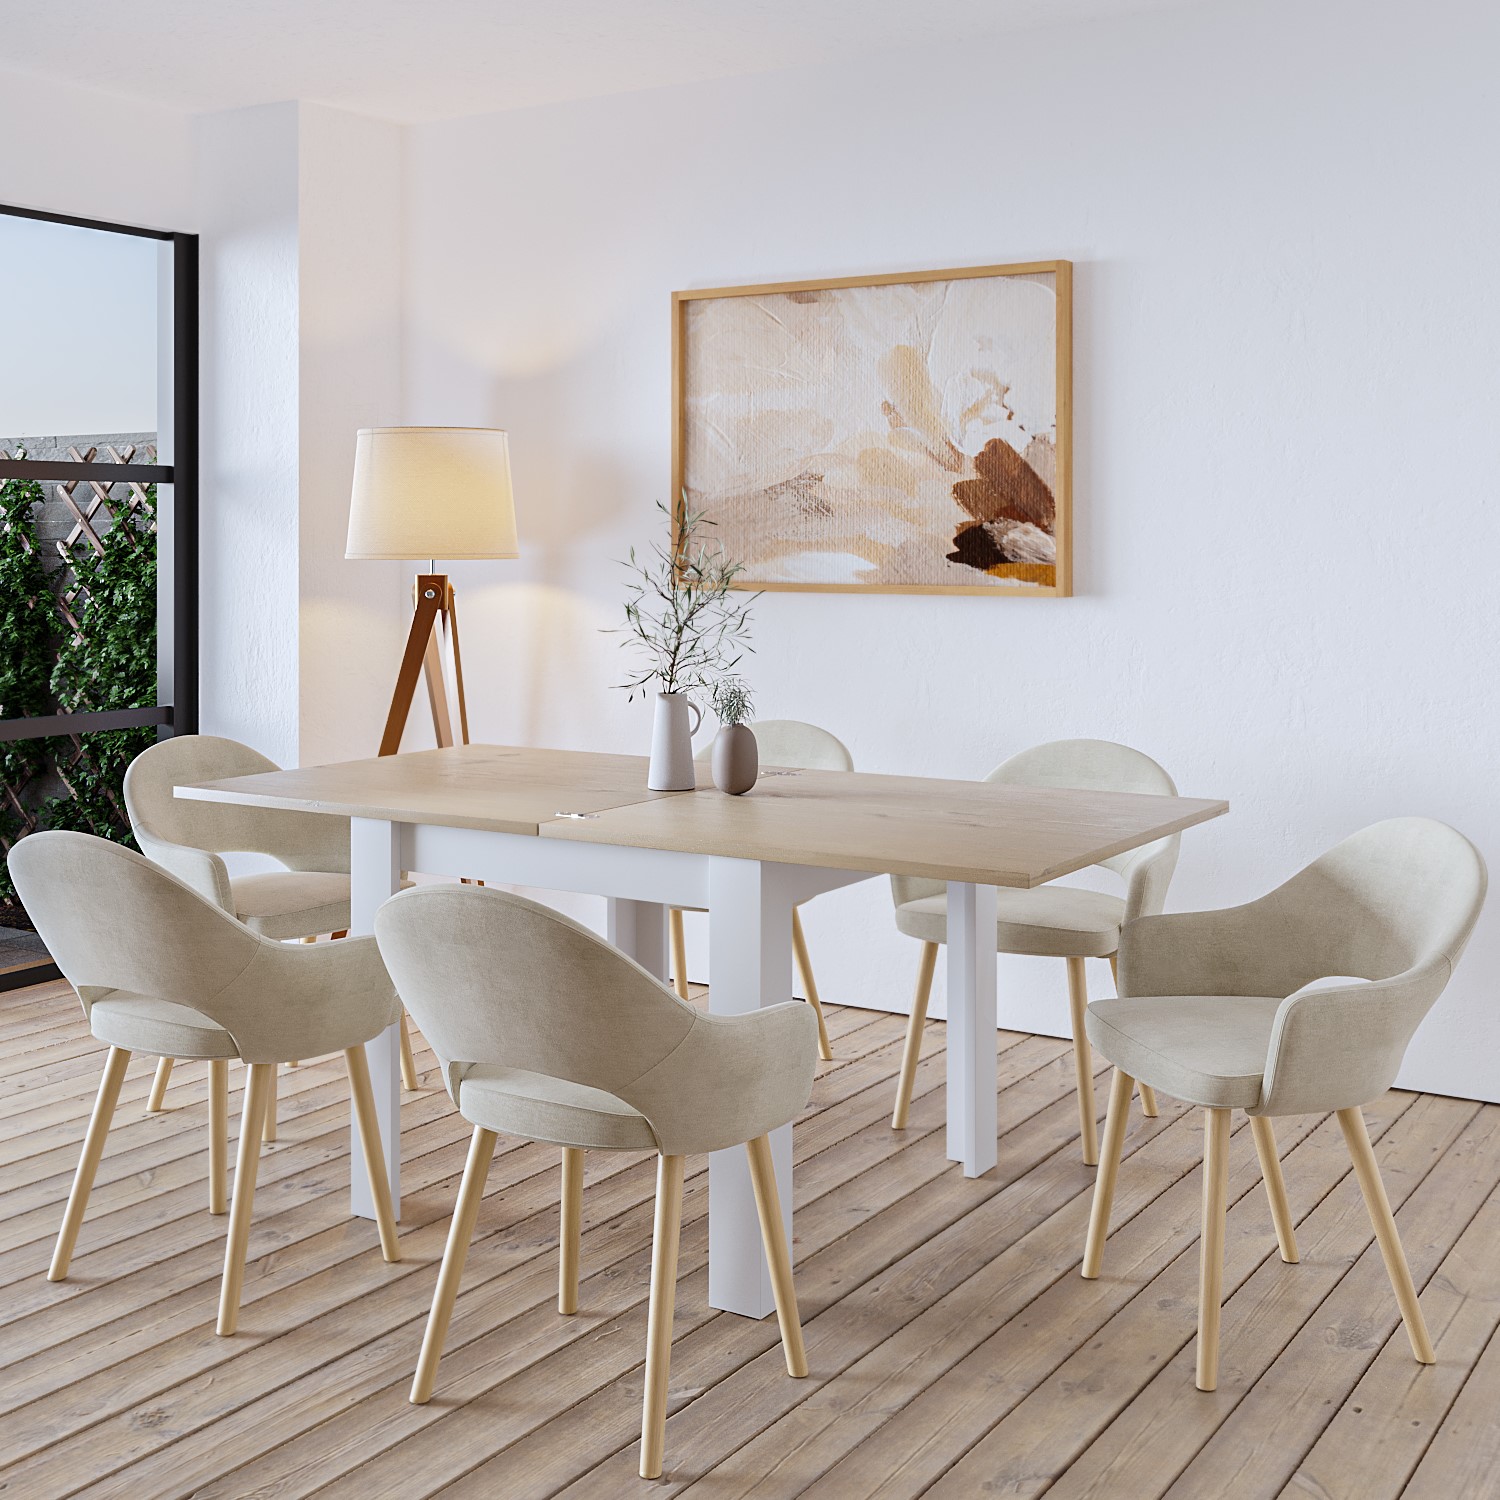 Photo of Cream and oak extendable dining table with 6 beige fabric dining chairs - new town